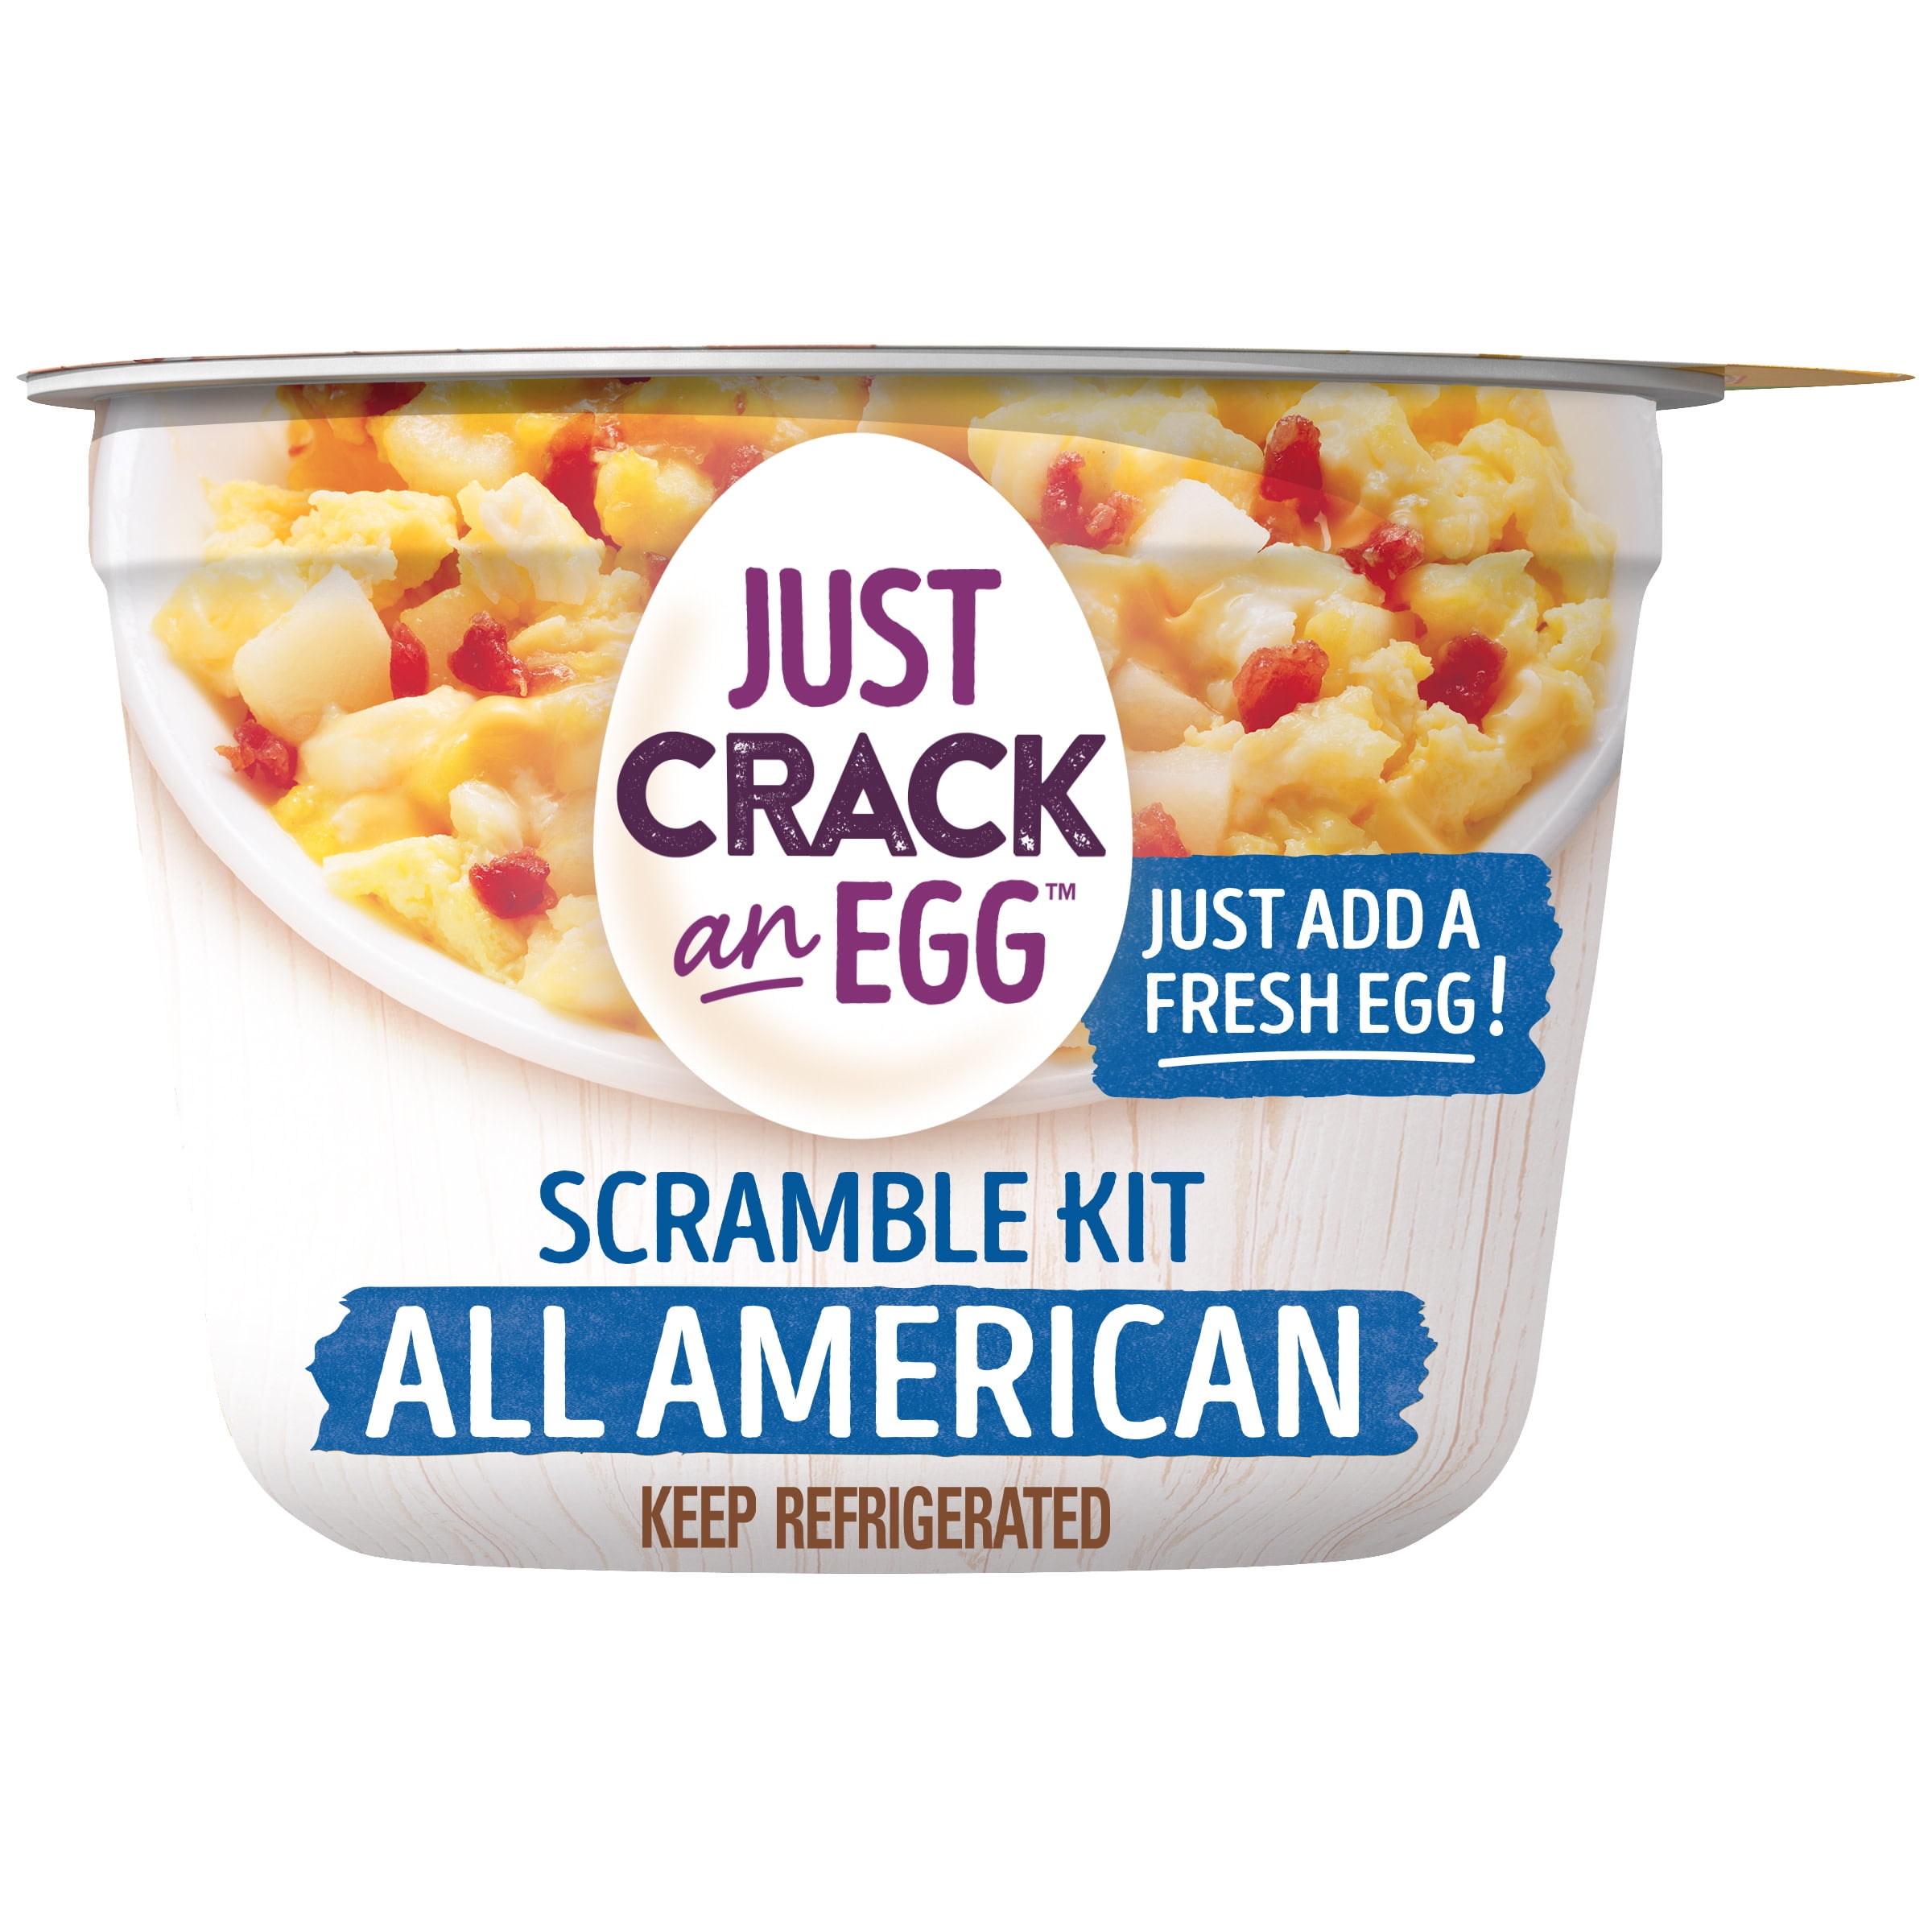 Just Crack an Egg All American Scramble Breakfast Bowl Kit with Potatoes, Sharp Cheddar Cheese and Uncured Bacon, 3 oz. Cup